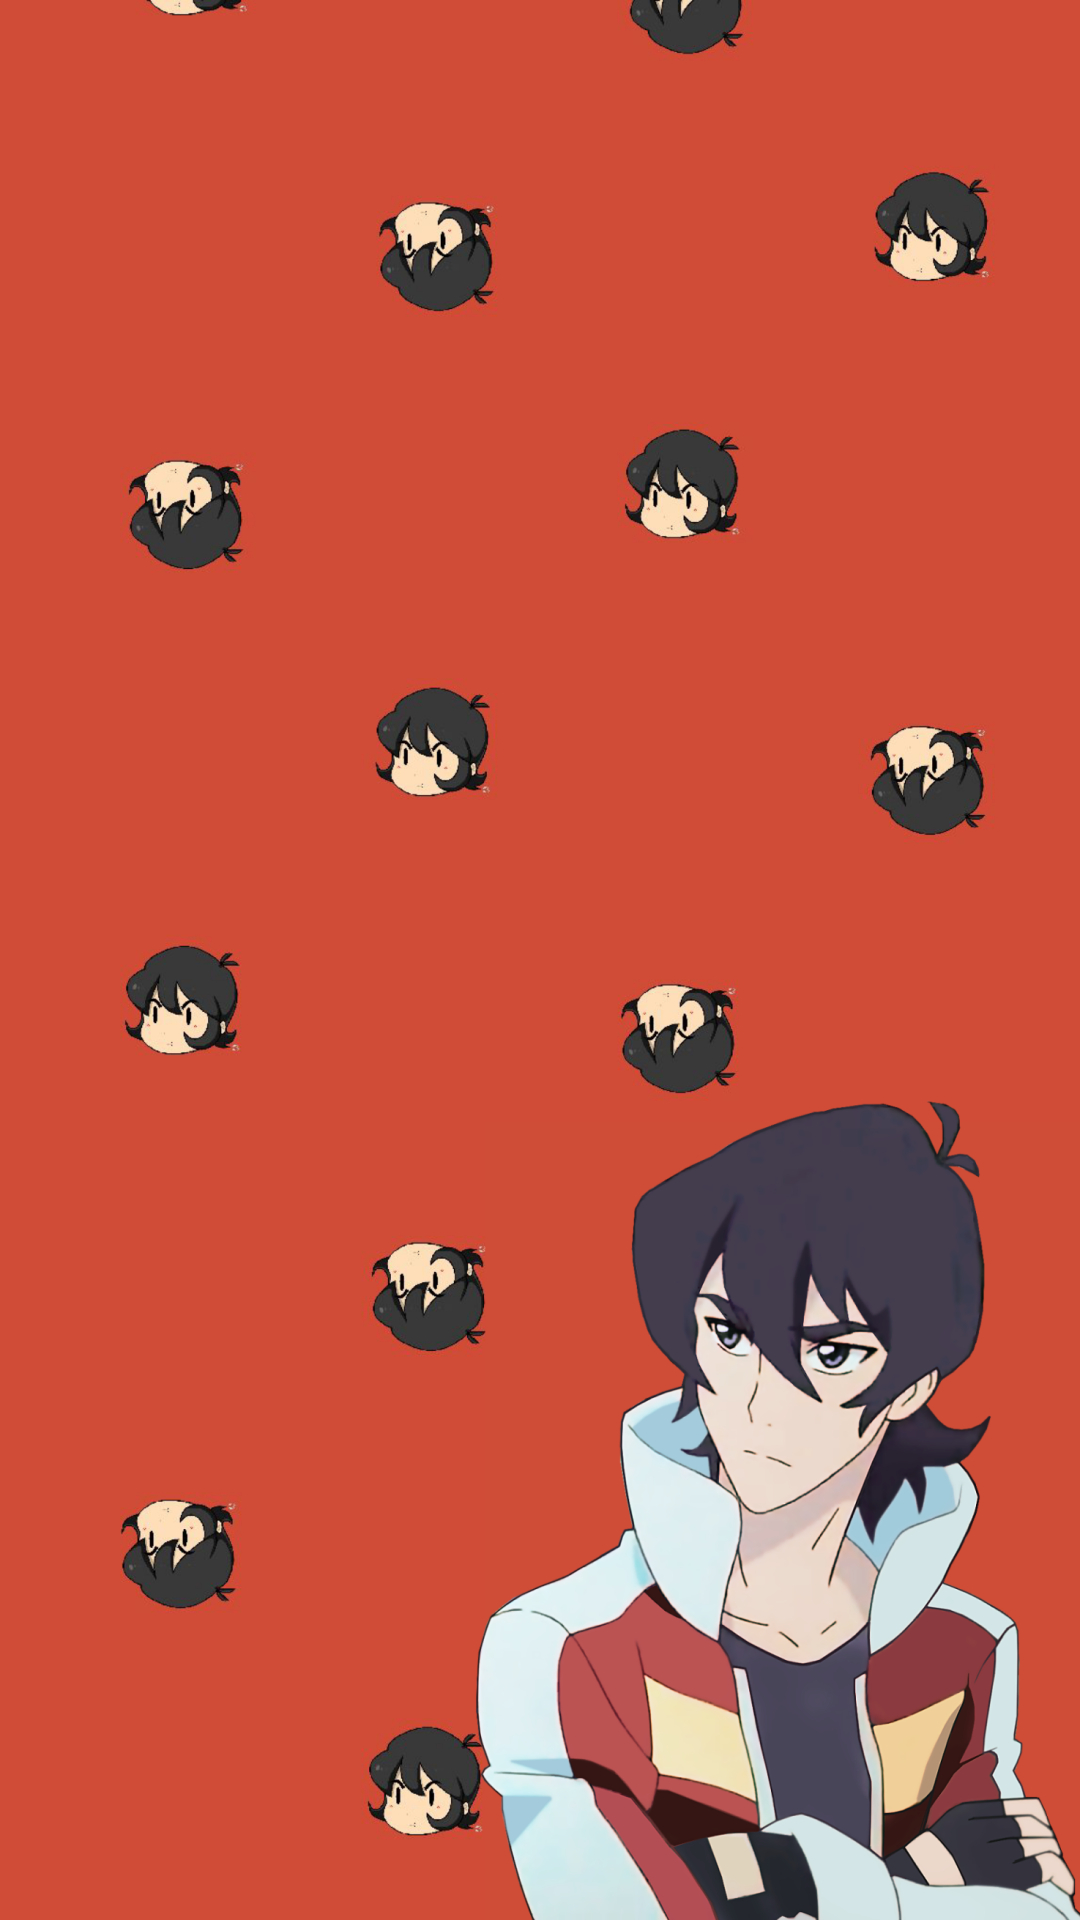 1080x1920 Related image | Voltron, Anime, Voltron legendary defender